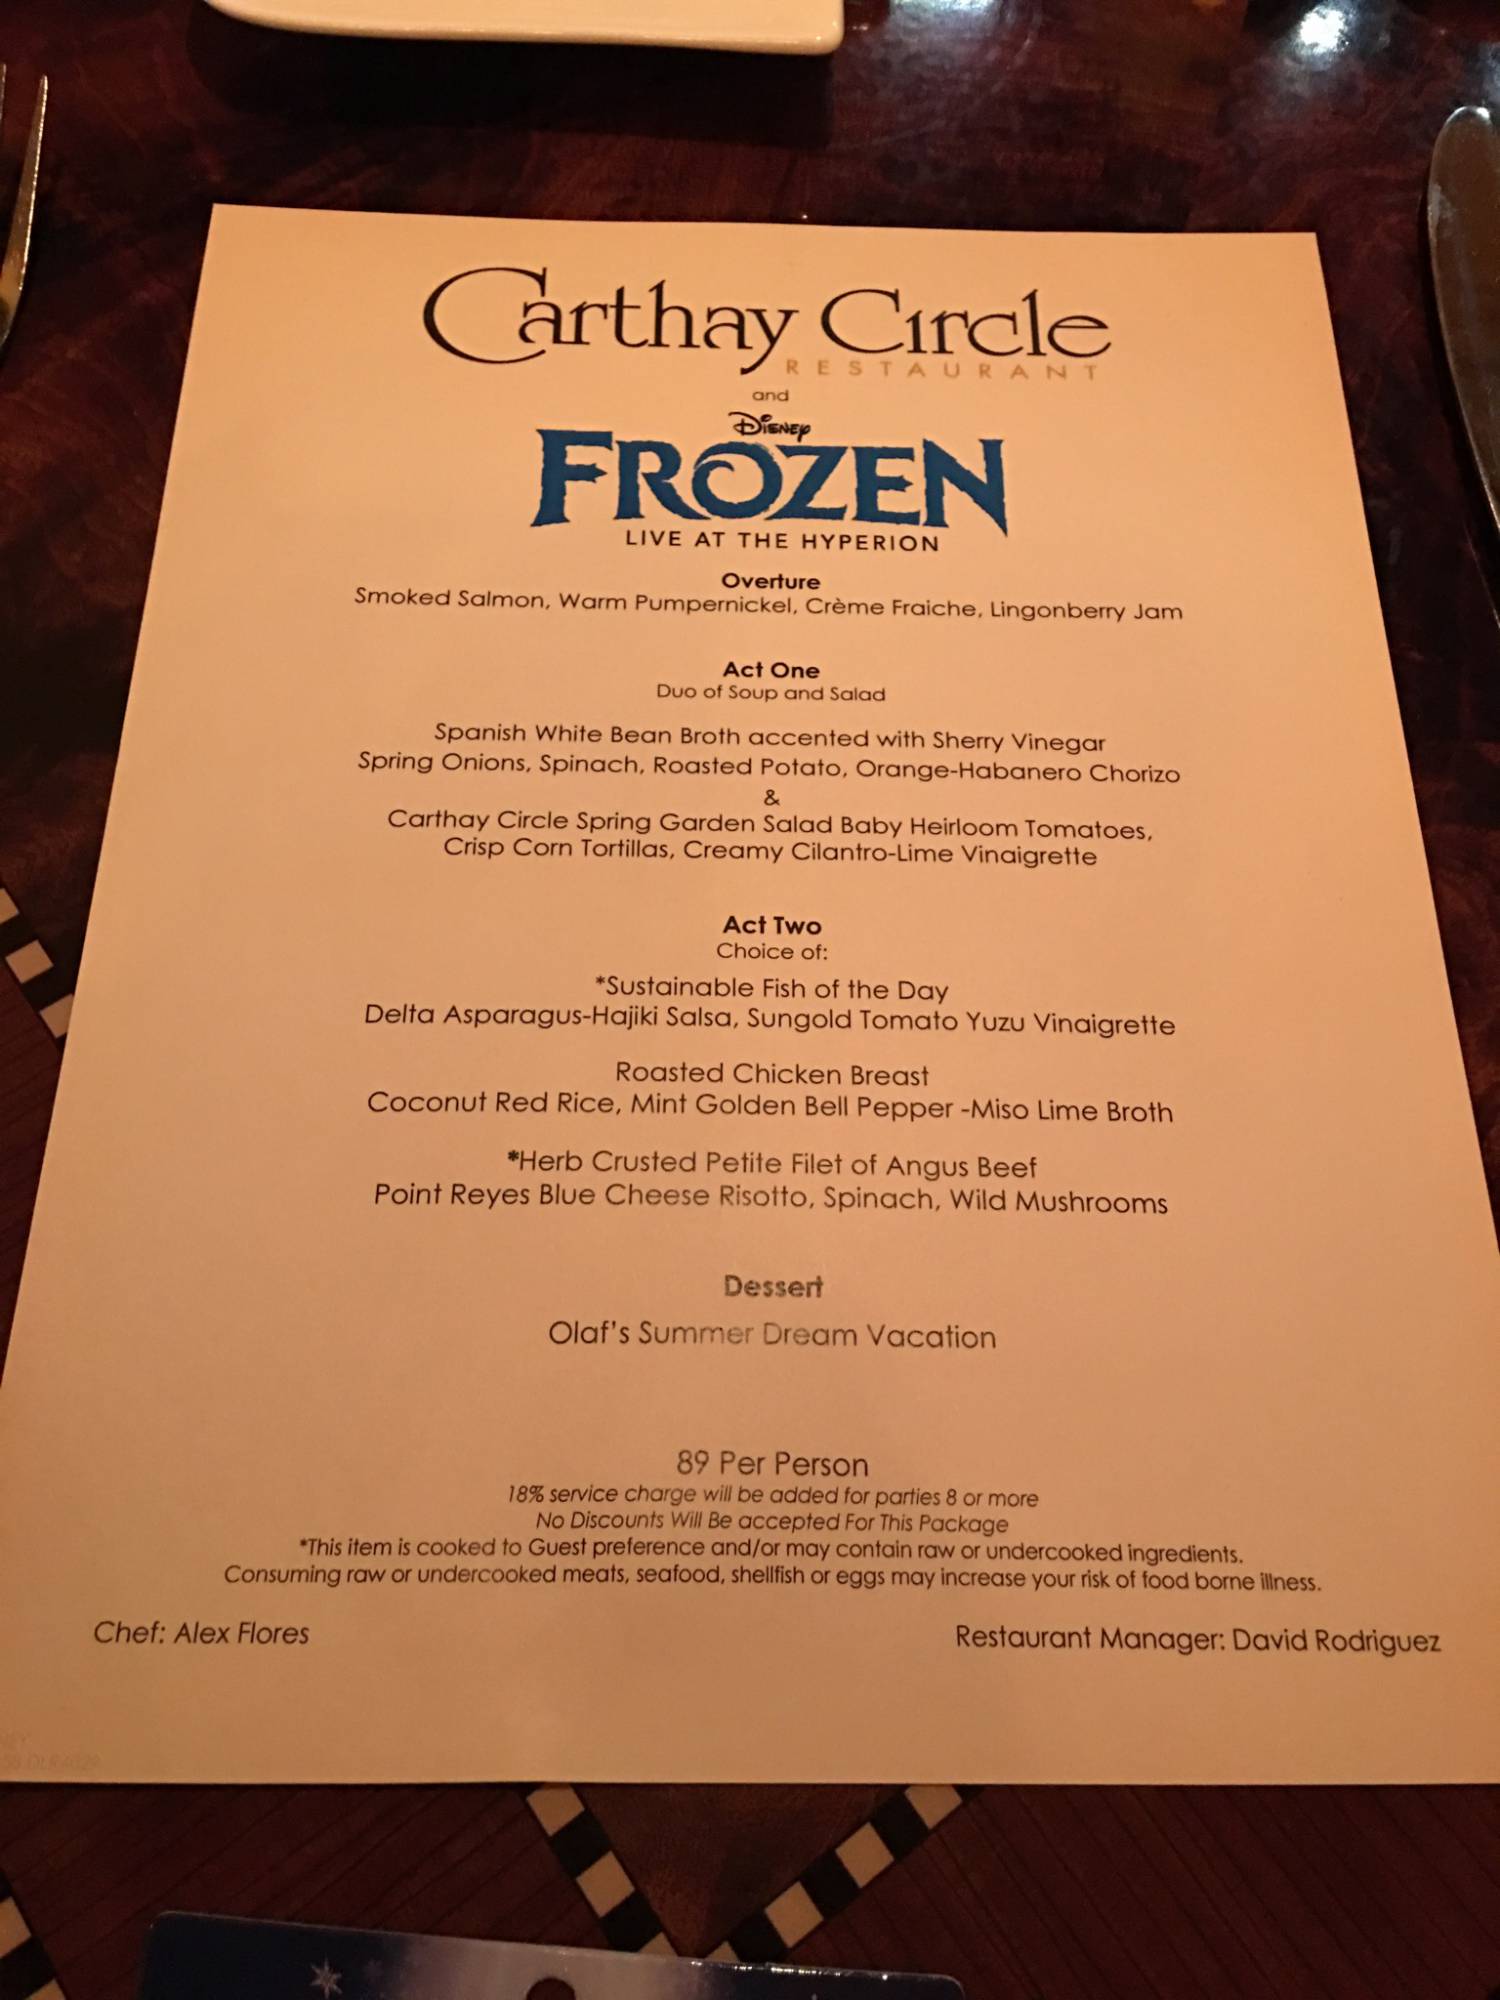 Enjoy lunch at Carthy Circle with the Frozen Dining Package |PassPorter.com